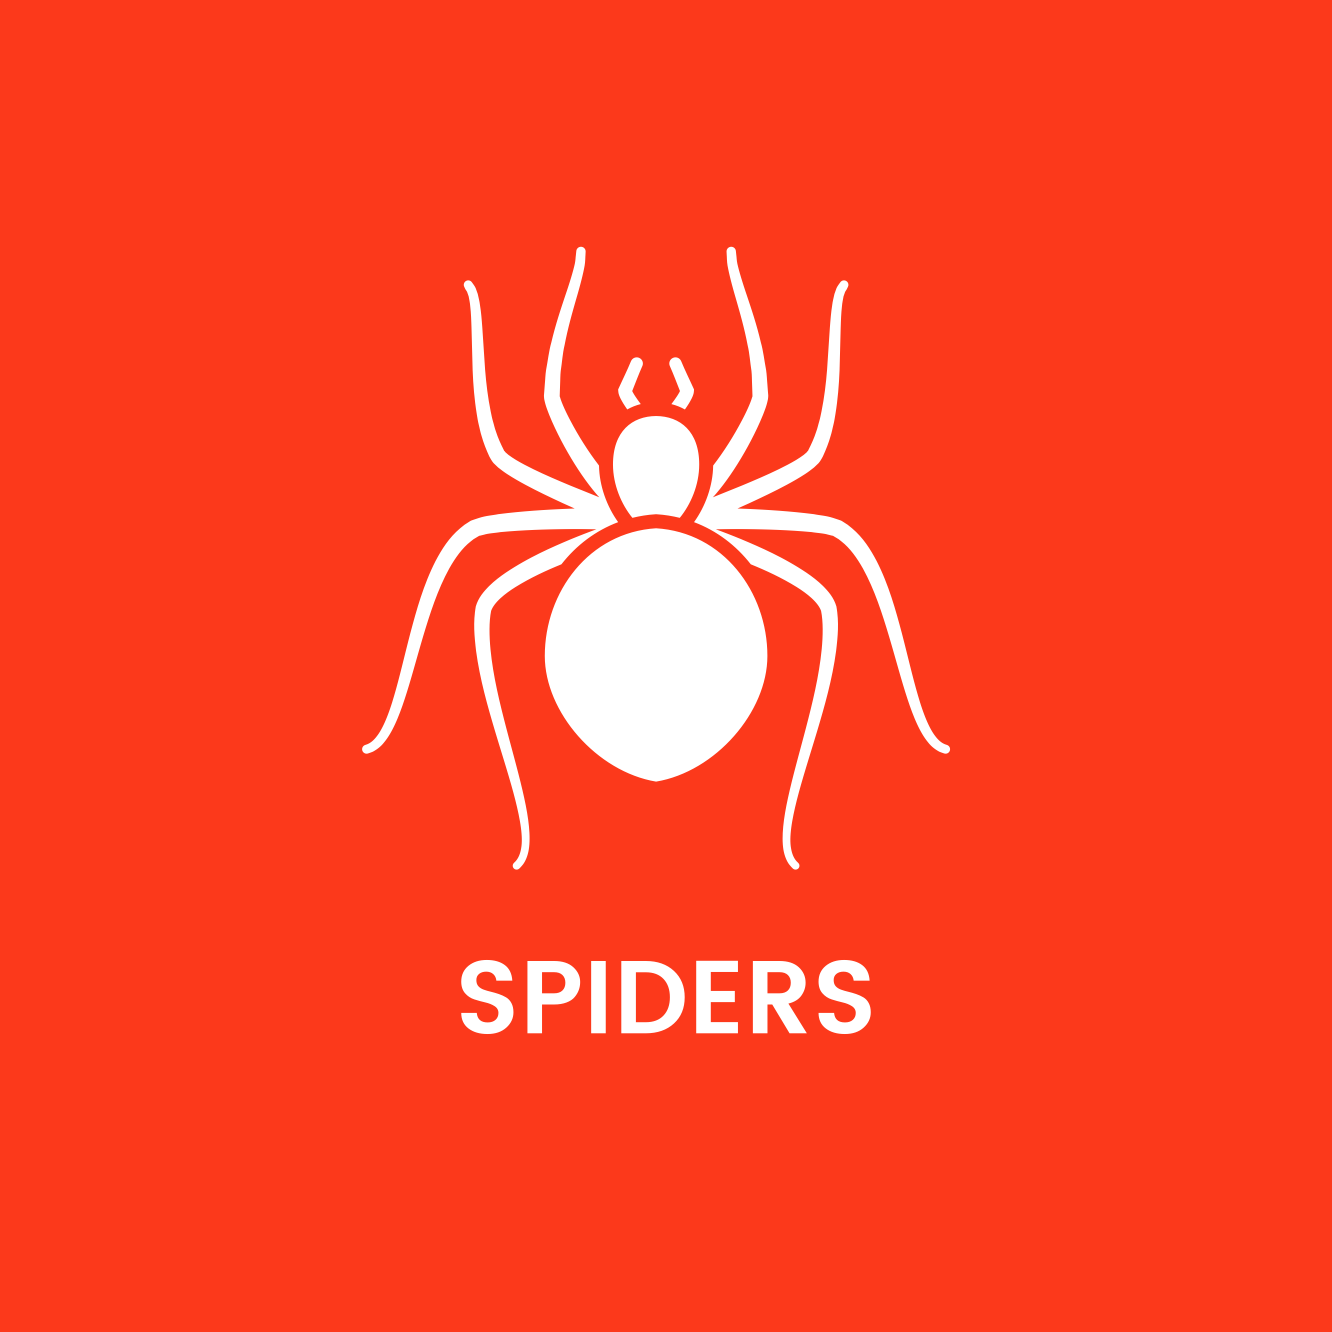 A white spider on a red background with the word spiders below it.